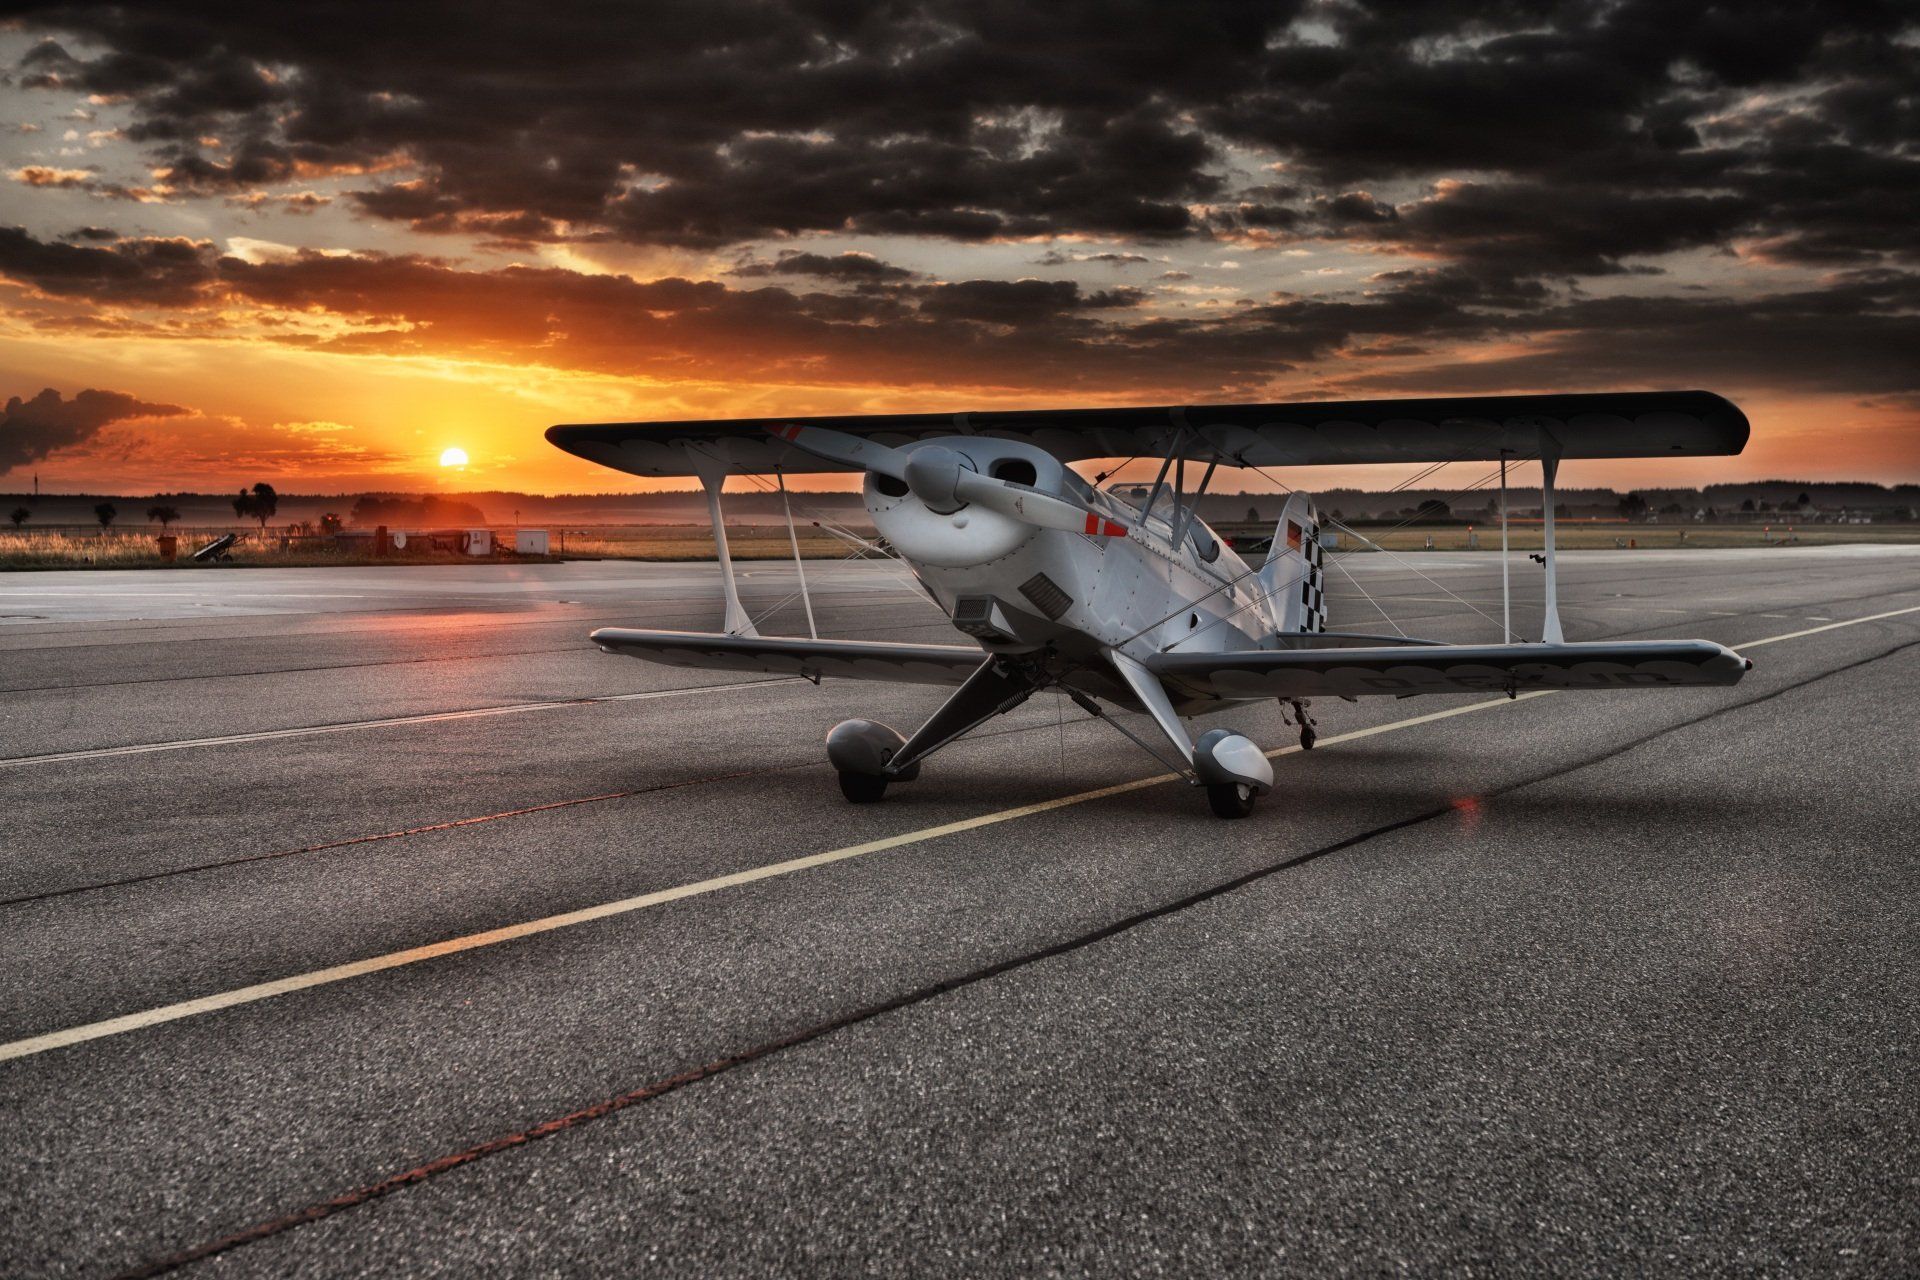 a small plane is parked on the runway at sunset